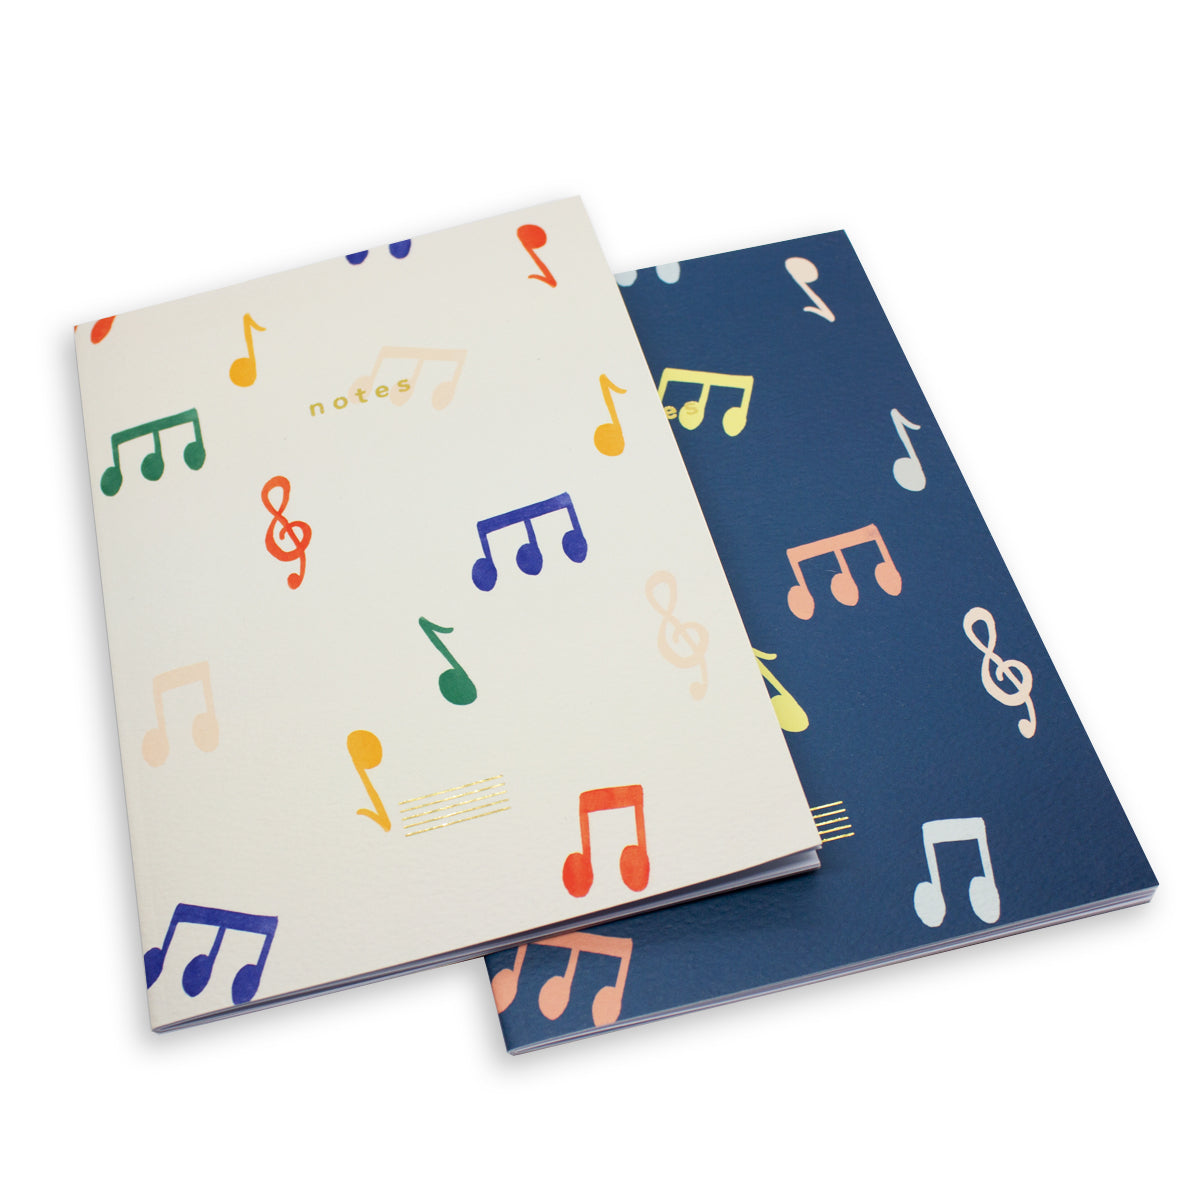 Notes Notebook Set of 2 - Blank